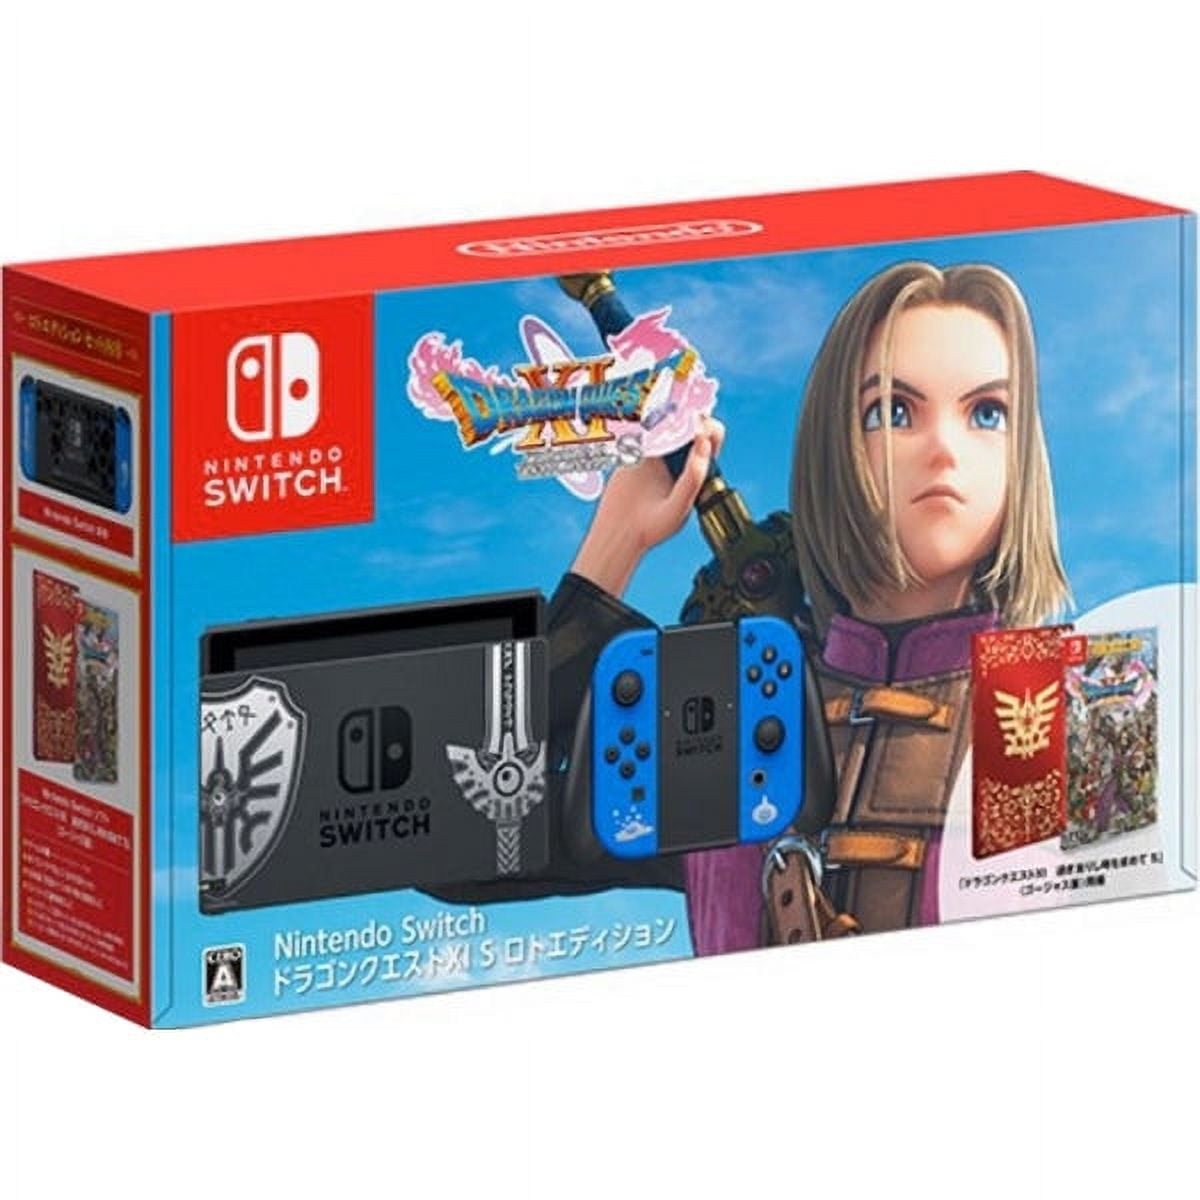 Nintendo Switch Console - Dragon Quest XI S: Echoes of an Elusive